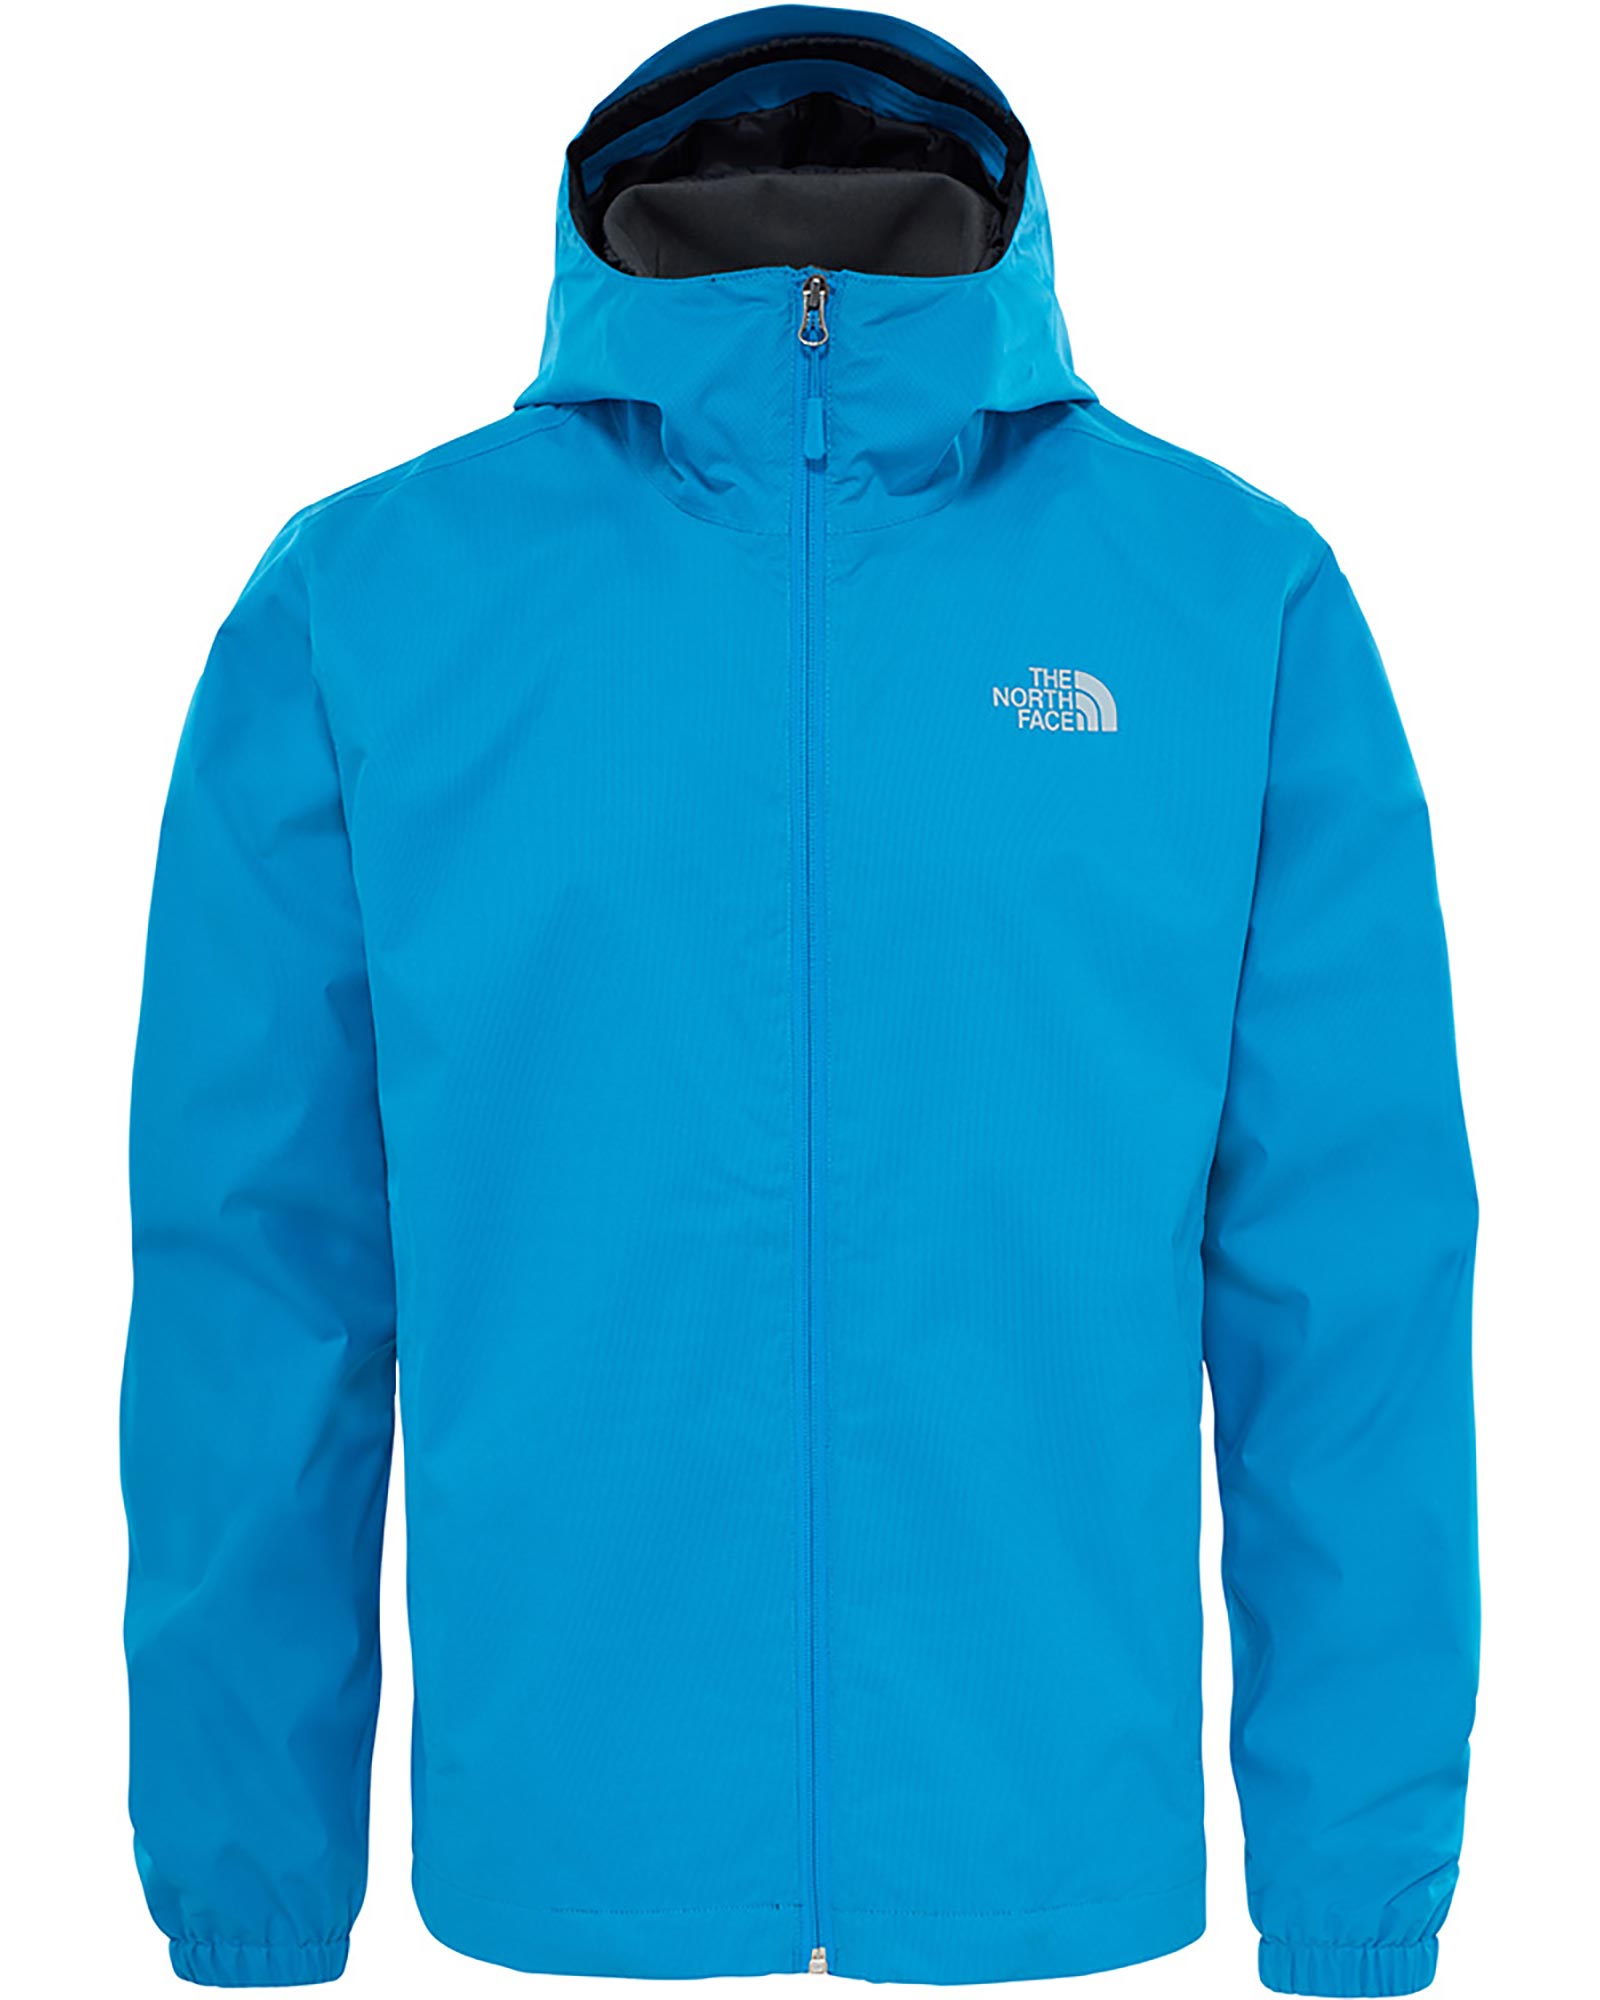 The North Face Quest DryVent Men’s Jacket - Hyper Blue Heather XS